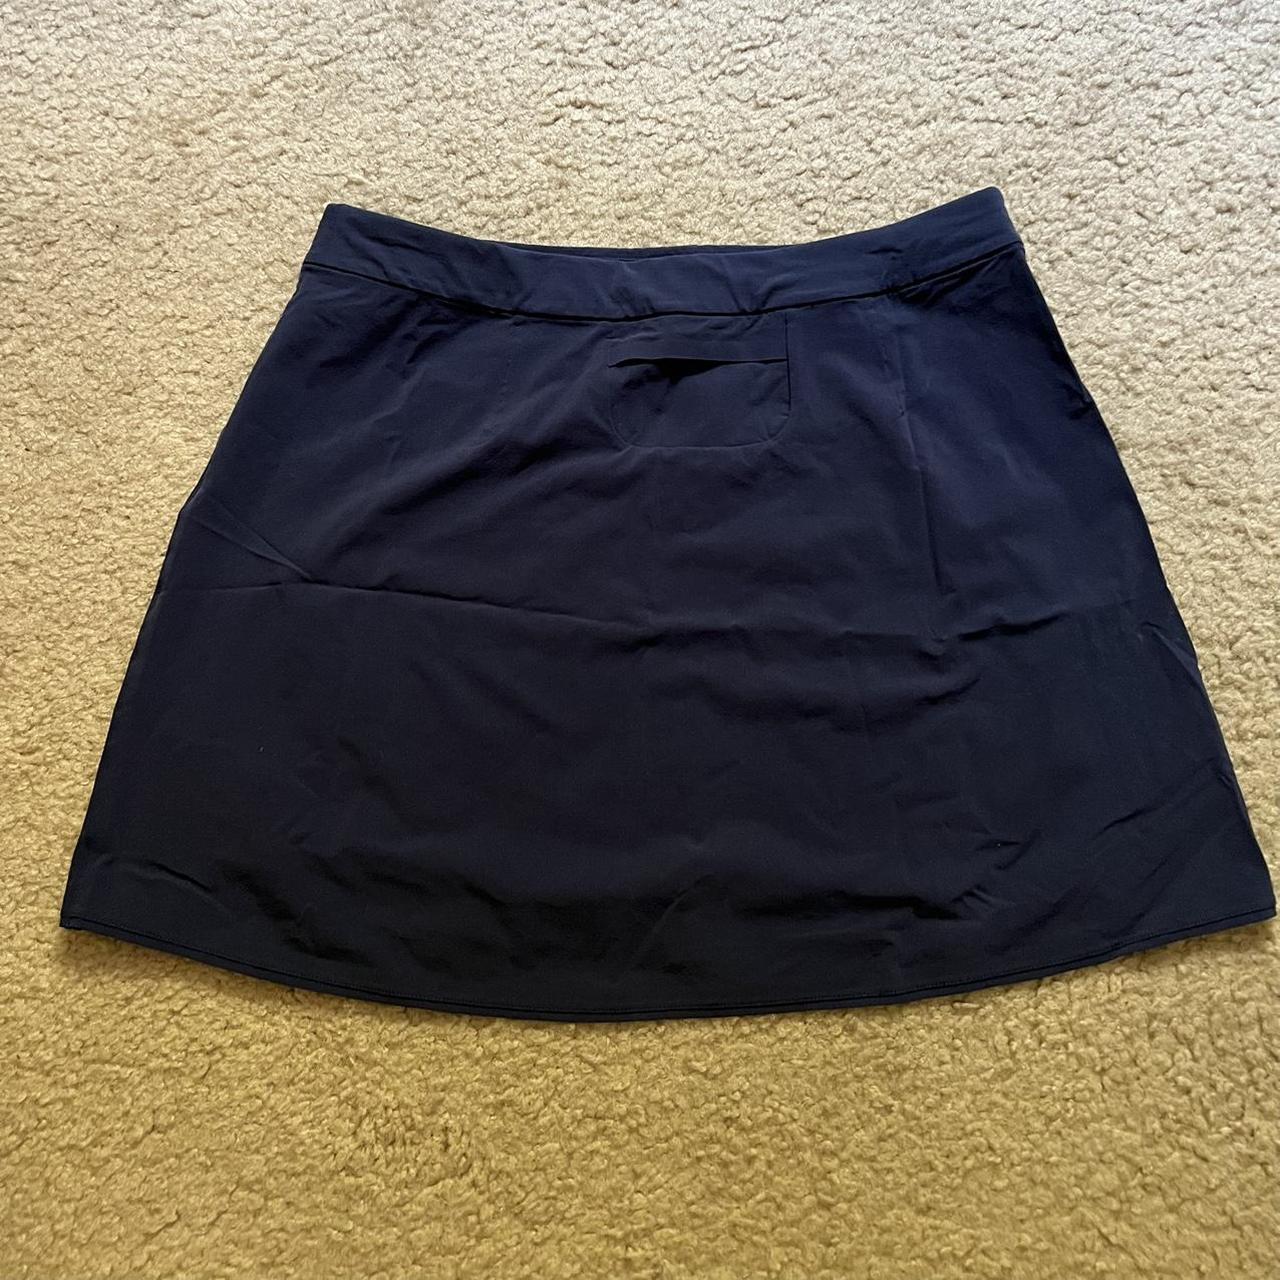 Outdoor Voices Women's Blue and Navy Skirt | Depop